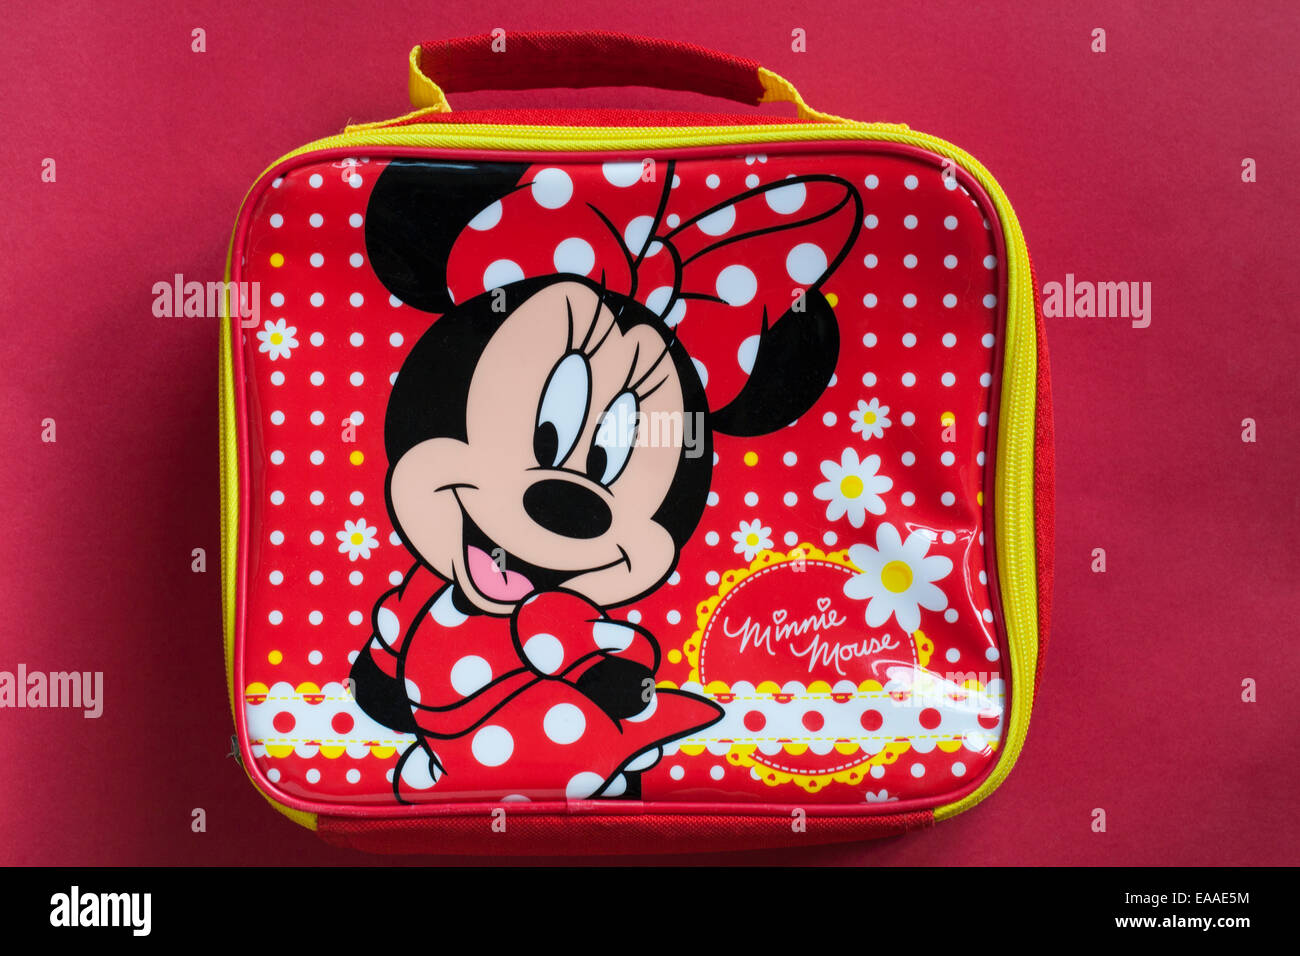 https://c8.alamy.com/comp/EAAE5M/minnie-mouse-childs-bag-lunch-box-set-on-red-background-EAAE5M.jpg